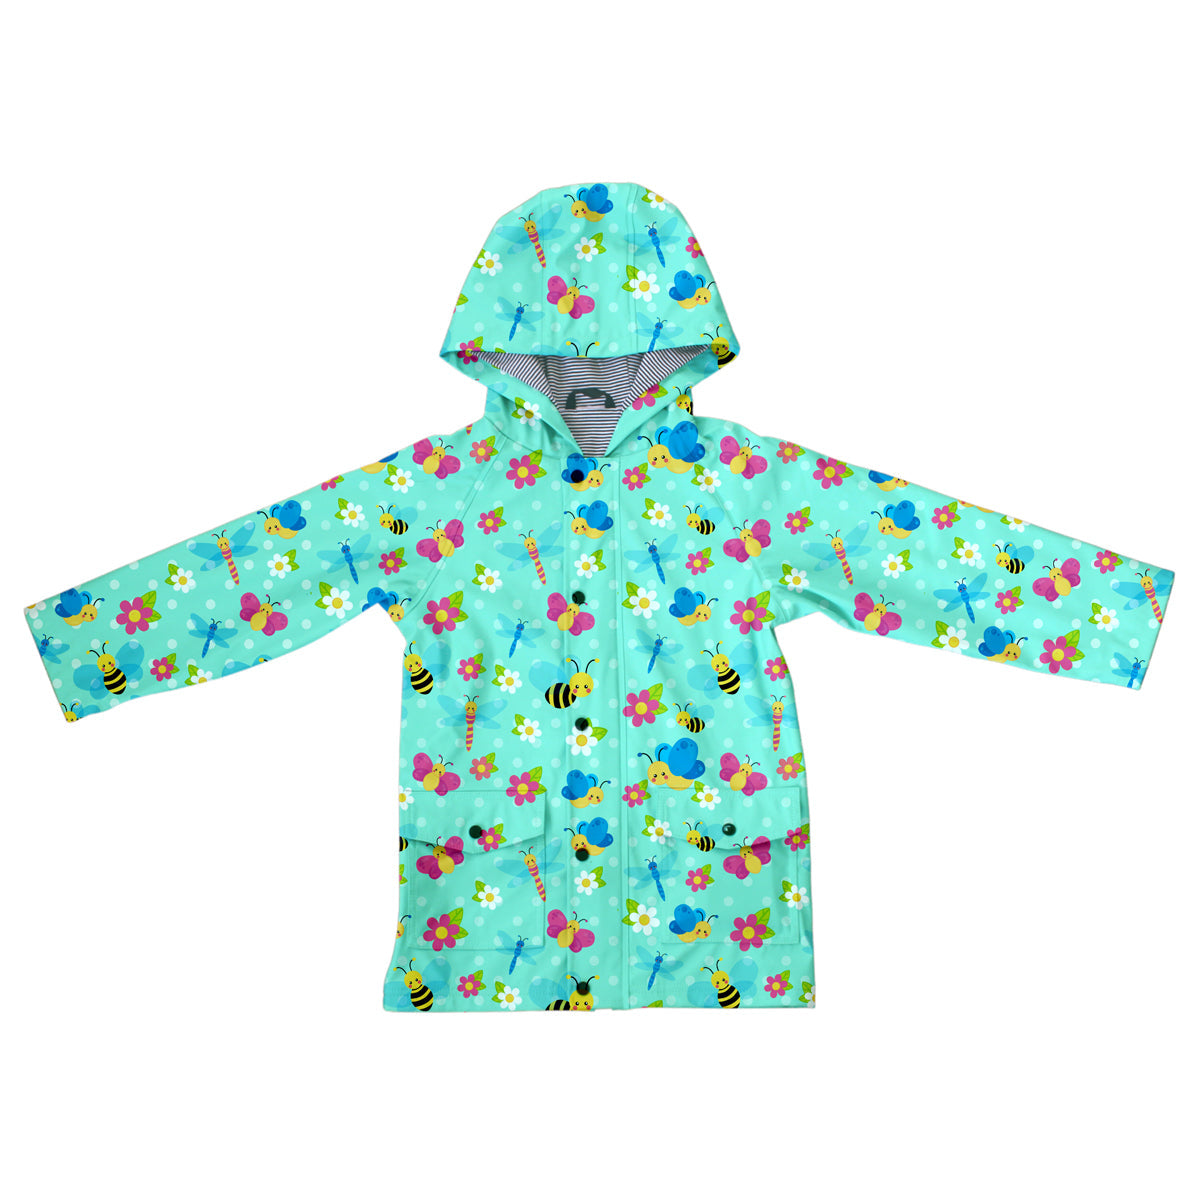 Garden of Wings Collection Raincoat